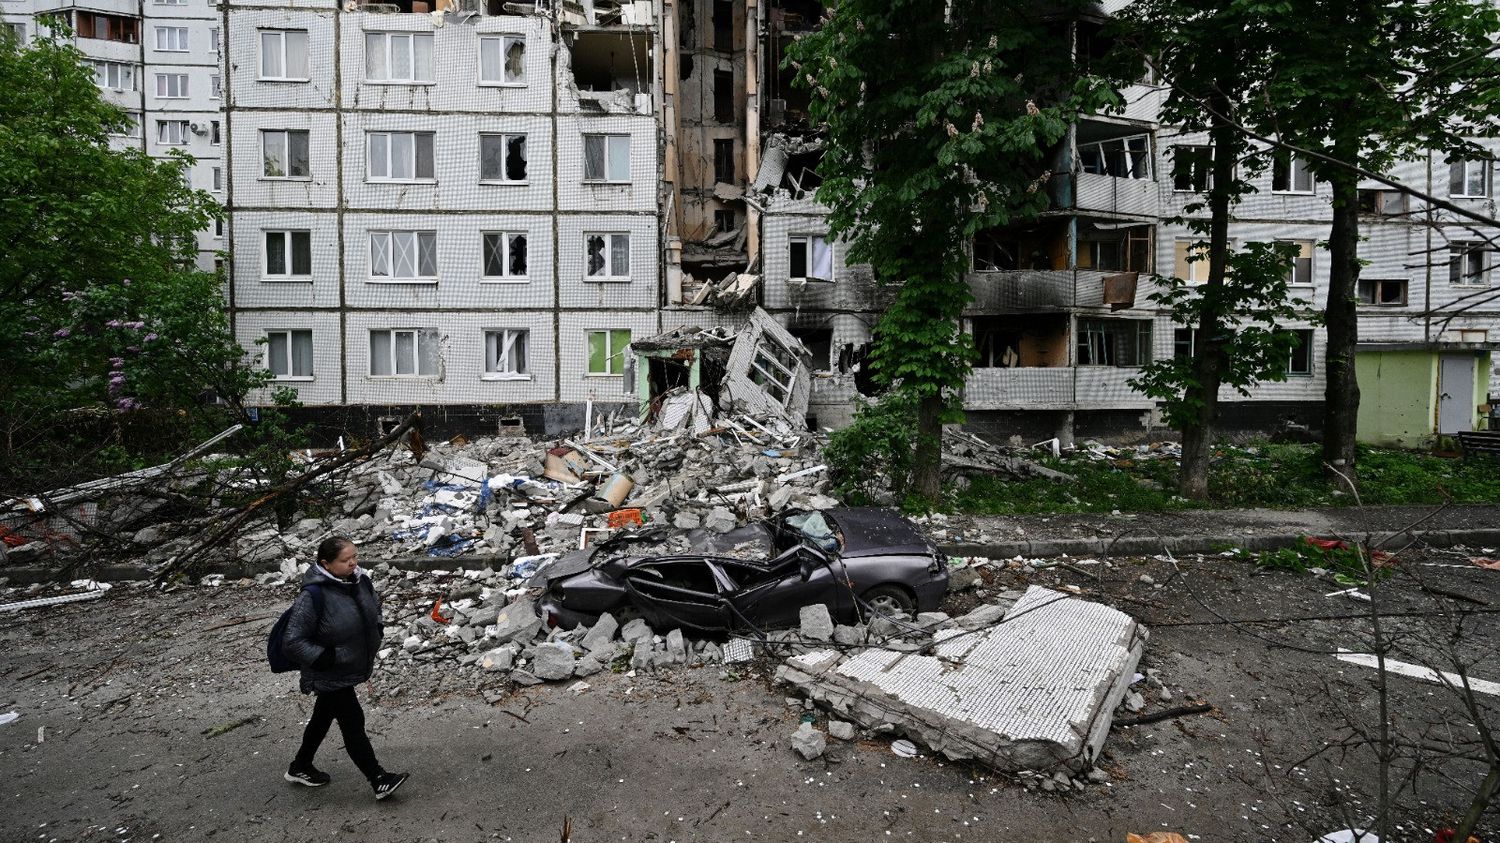 War in Ukraine: Amnesty International accuses Russia of using cluster munitions
